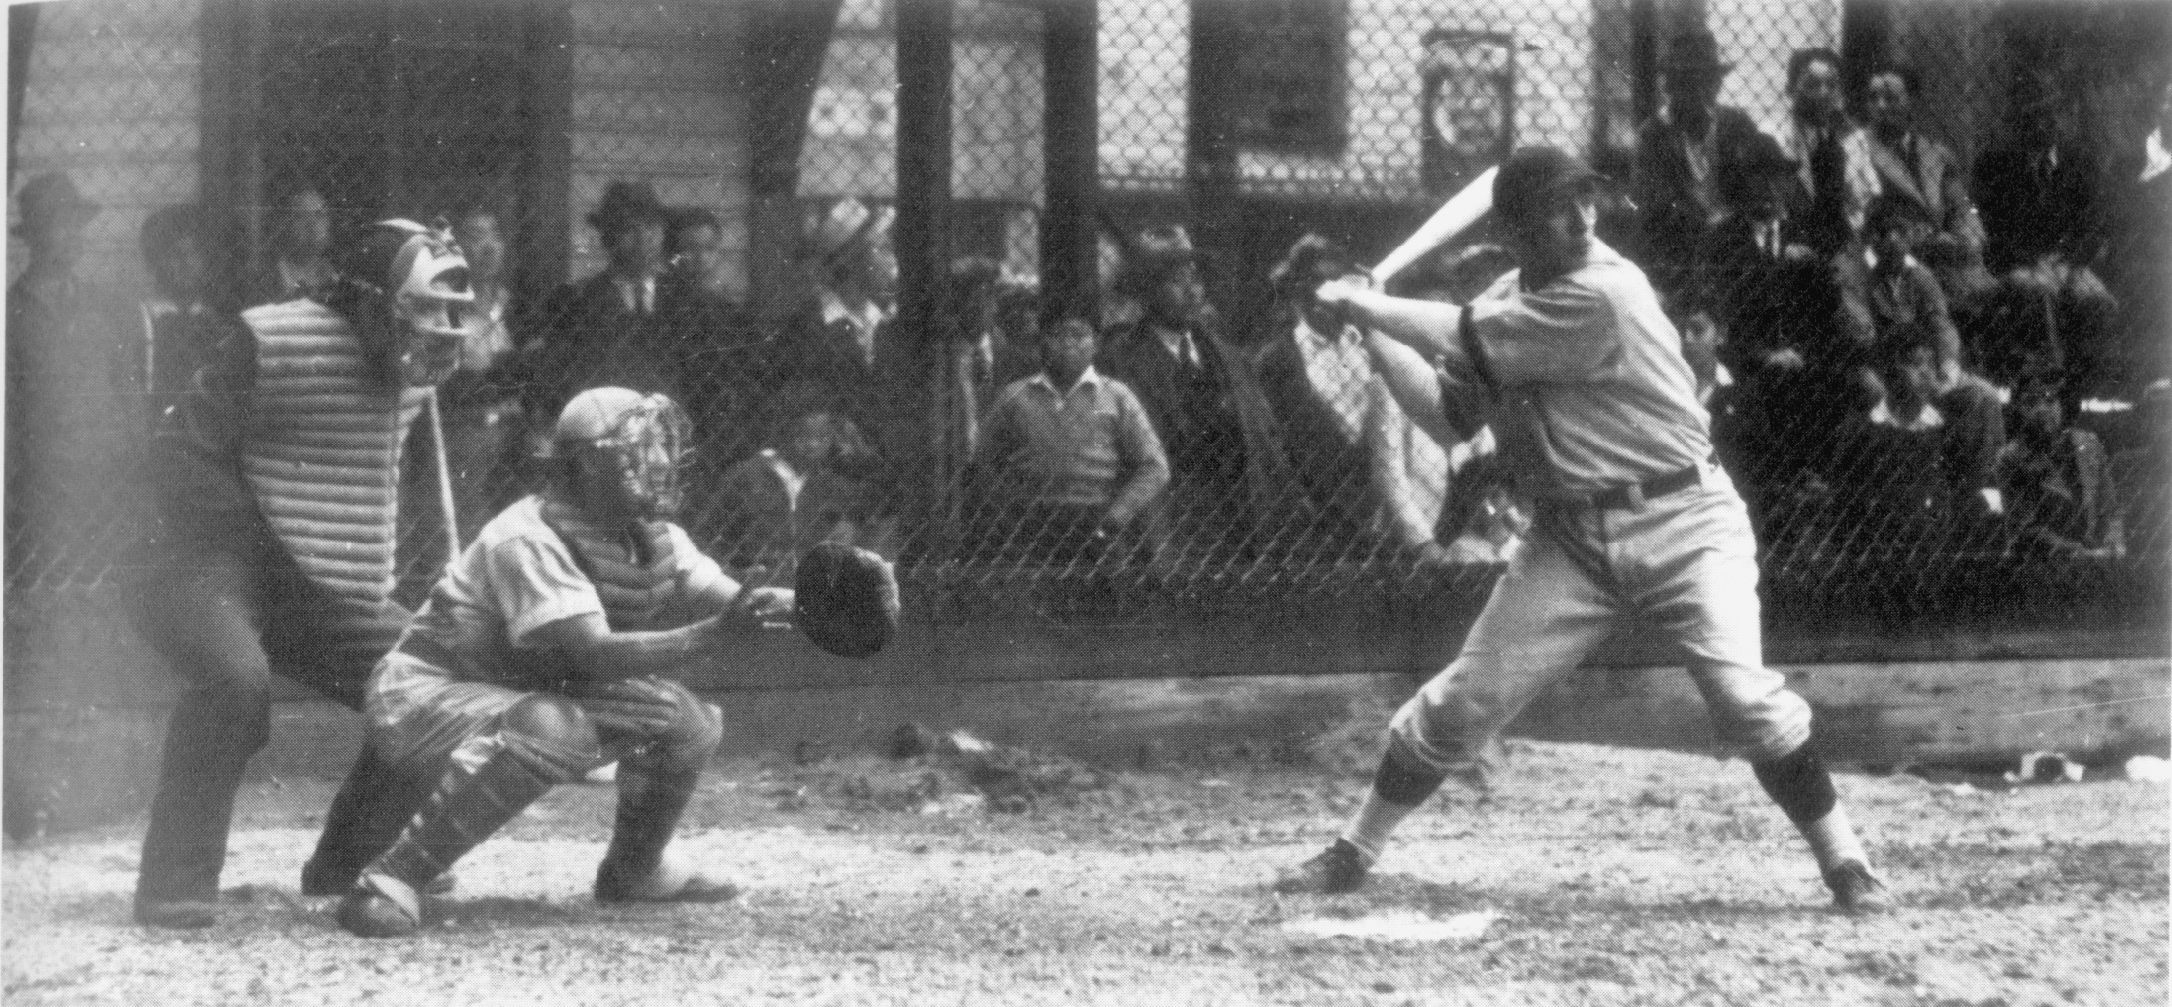 A man poised to hit a baseball with the umpire and catcher behind him with a group of people watching beyond a fence